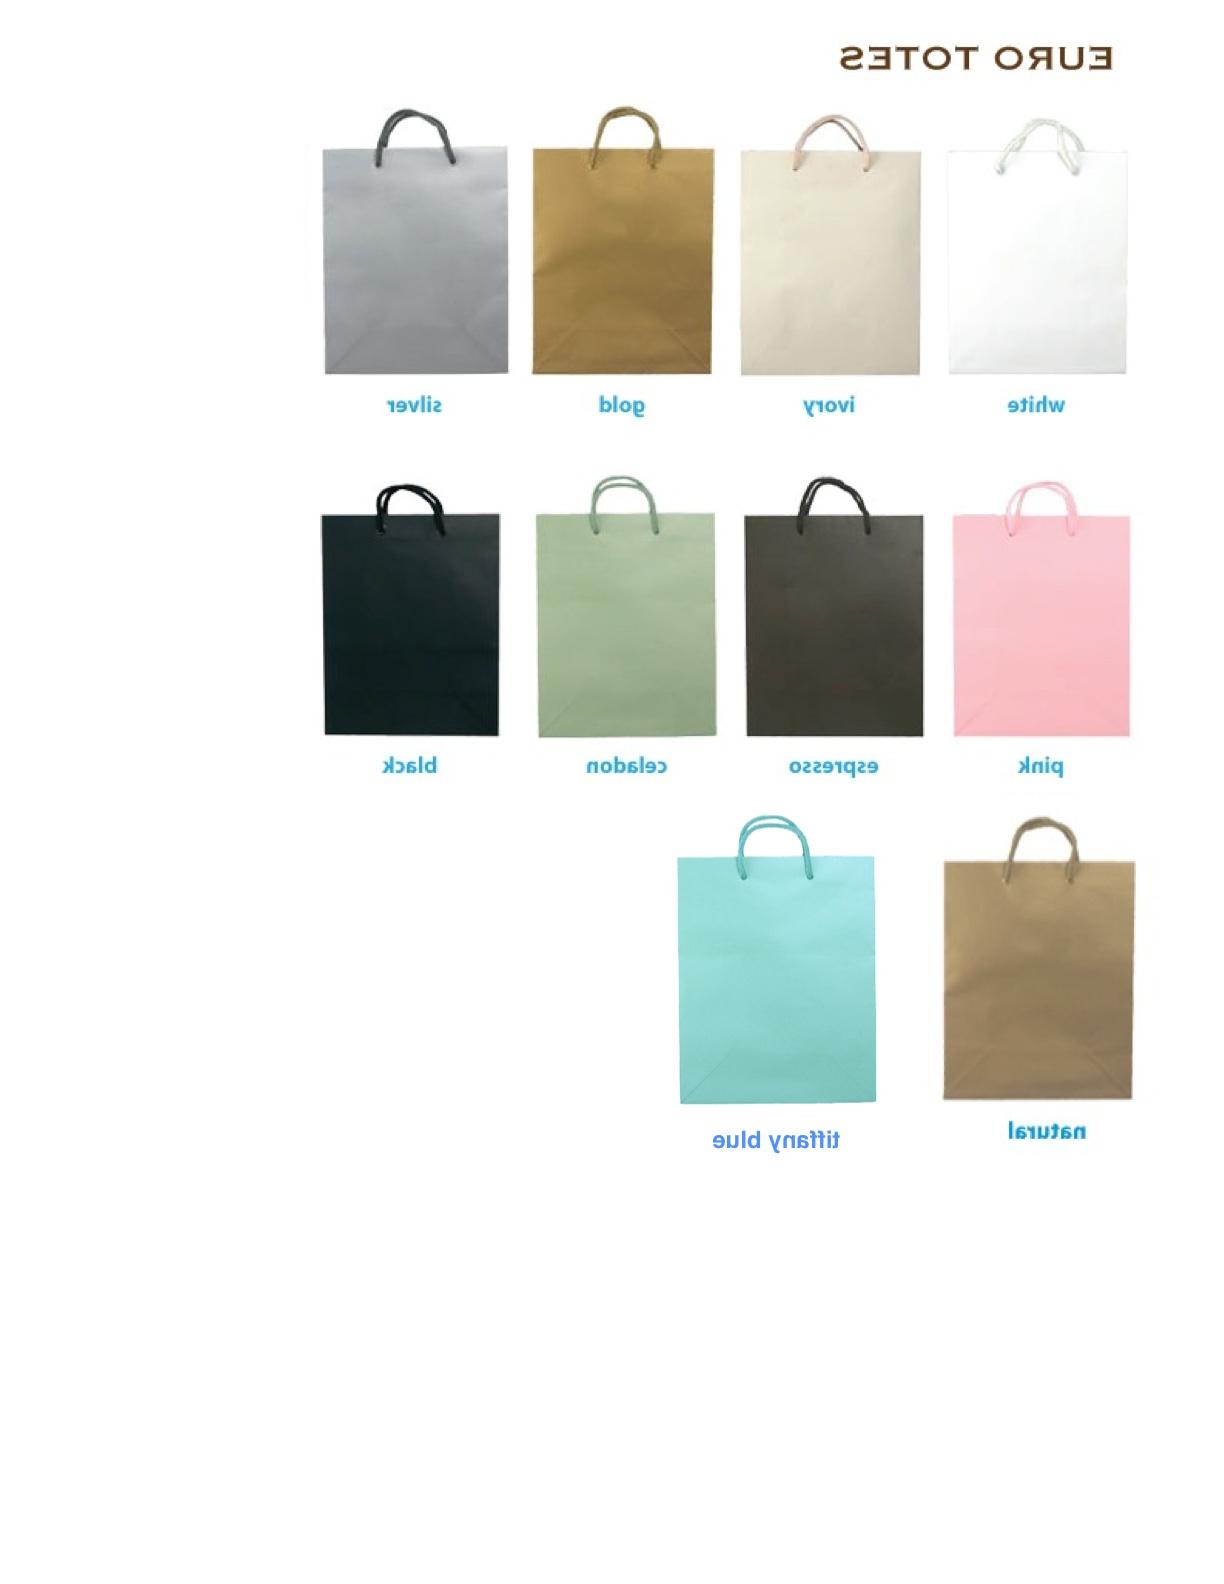 Blue Tote Bags puts the